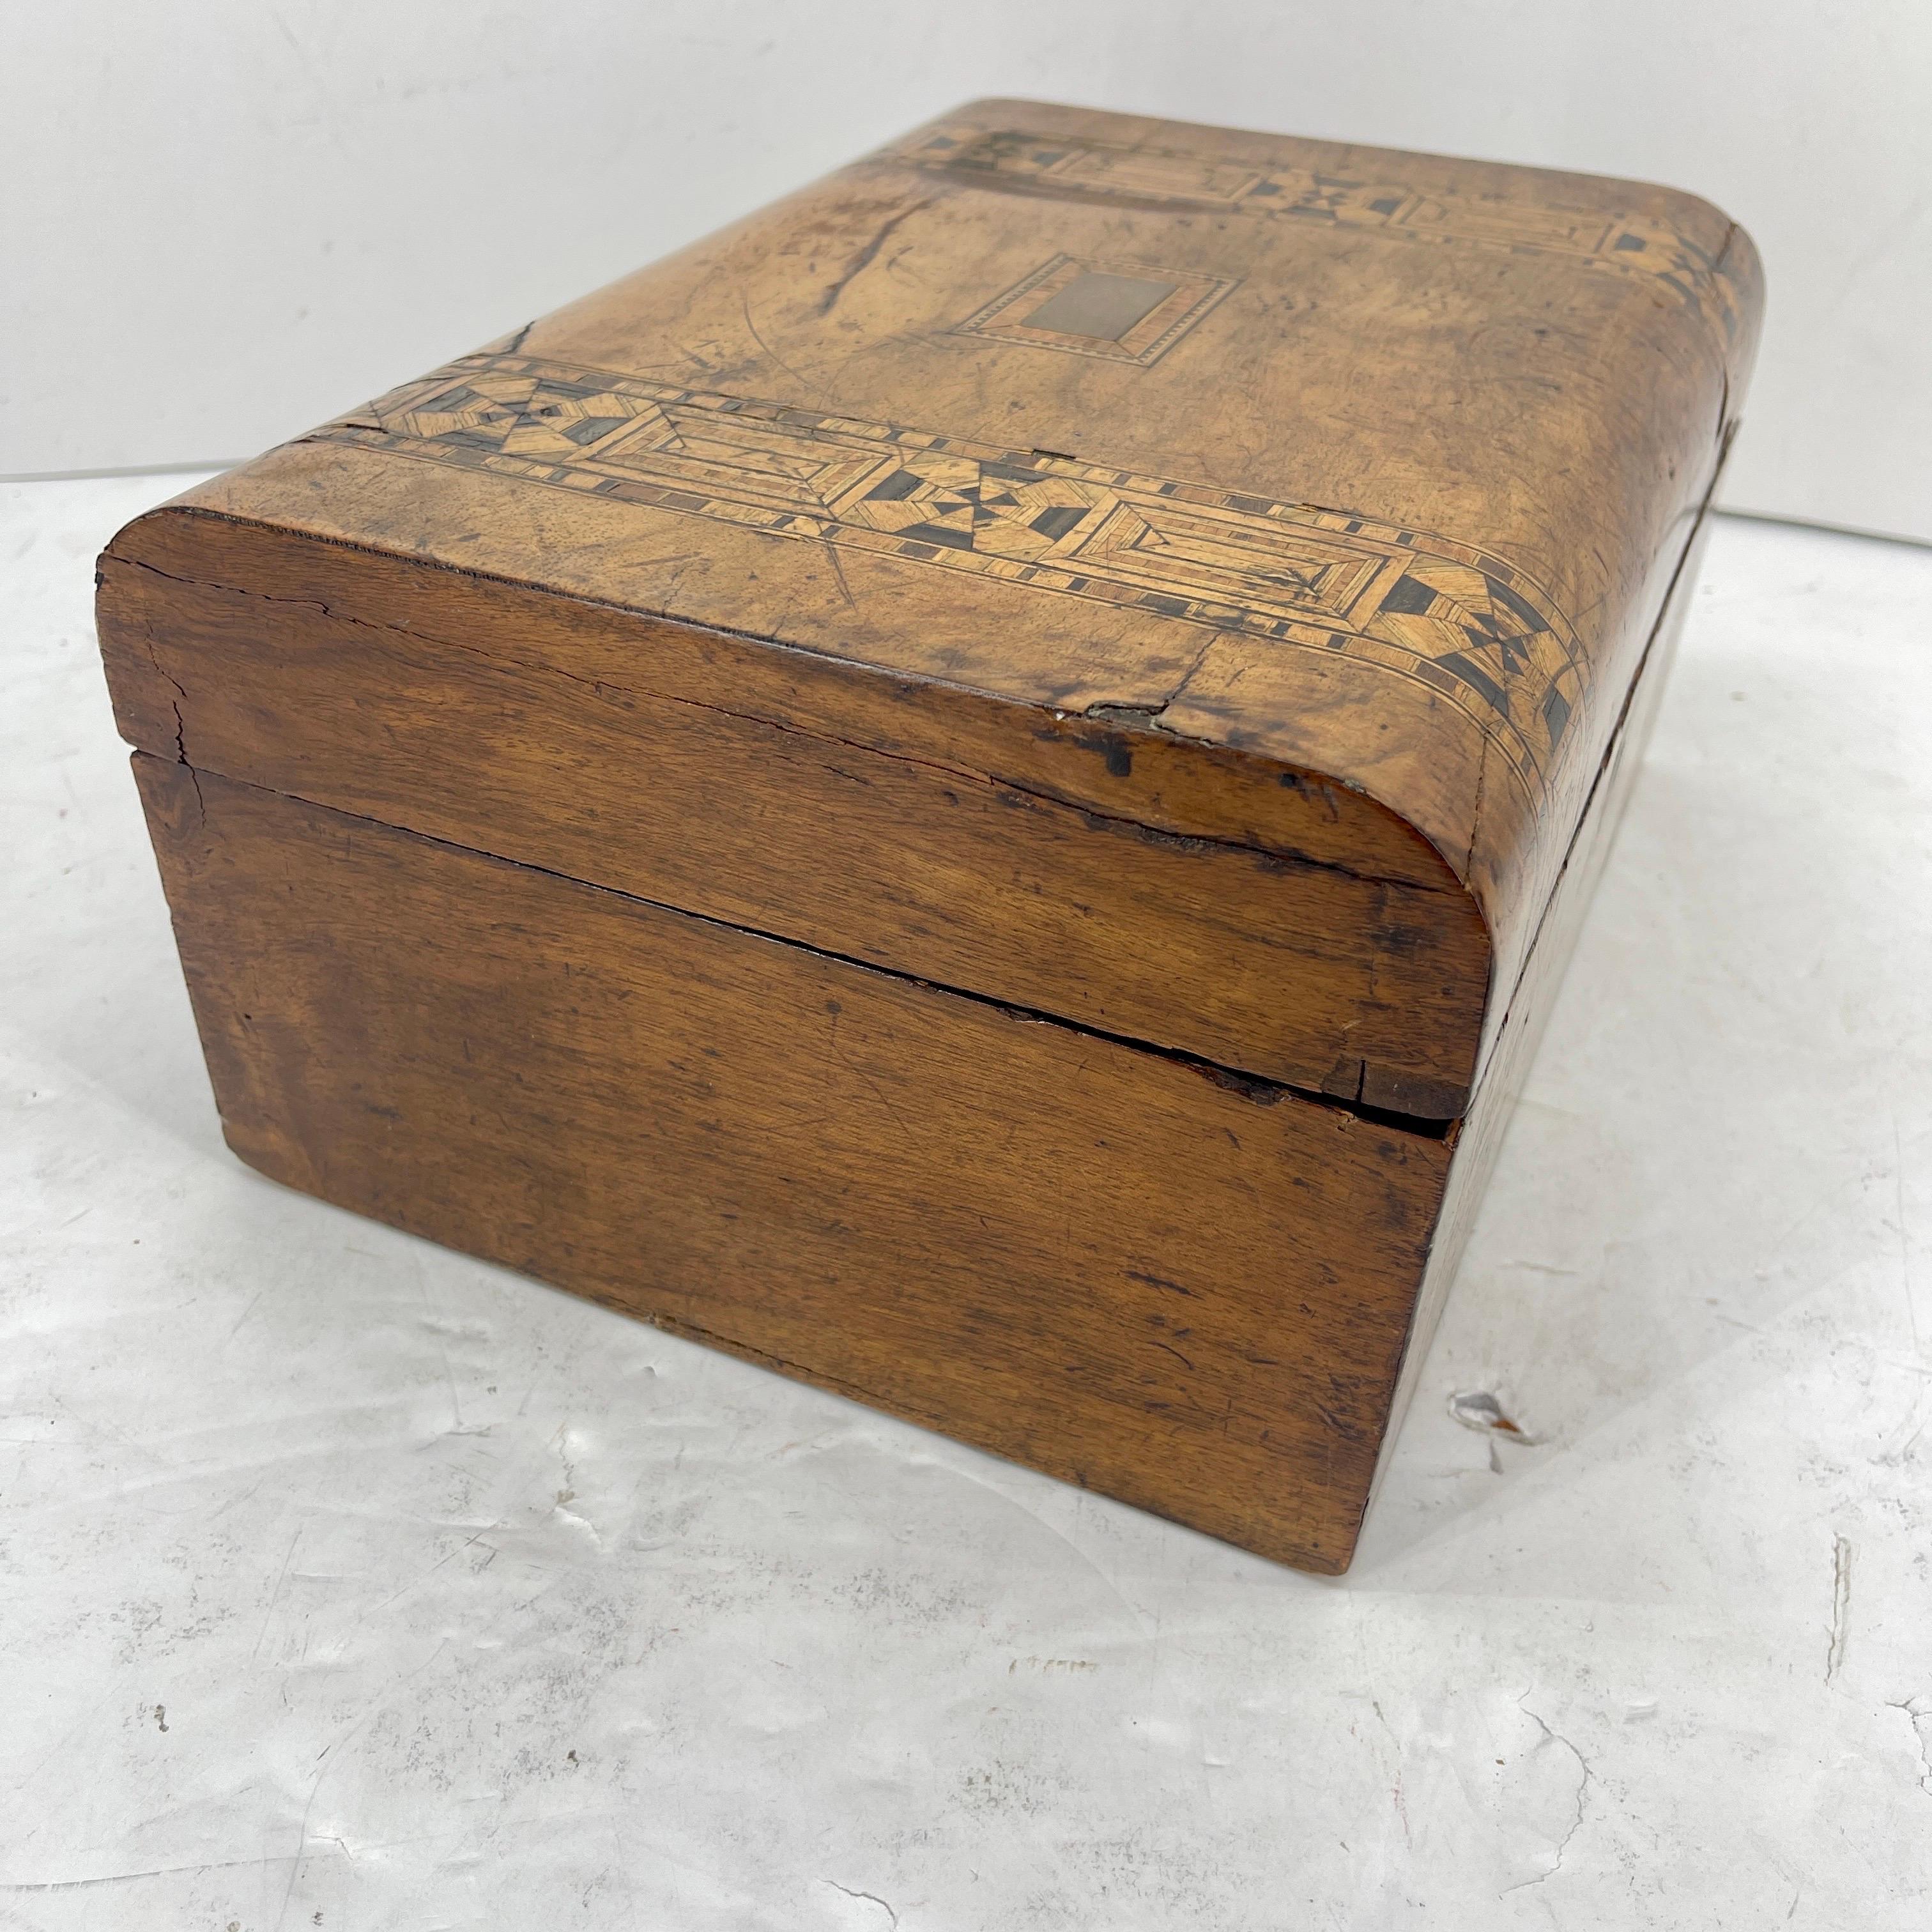 Swedish Inlaid Fruitwood and Veneered Box with Curved Top Early 19th Century For Sale 4